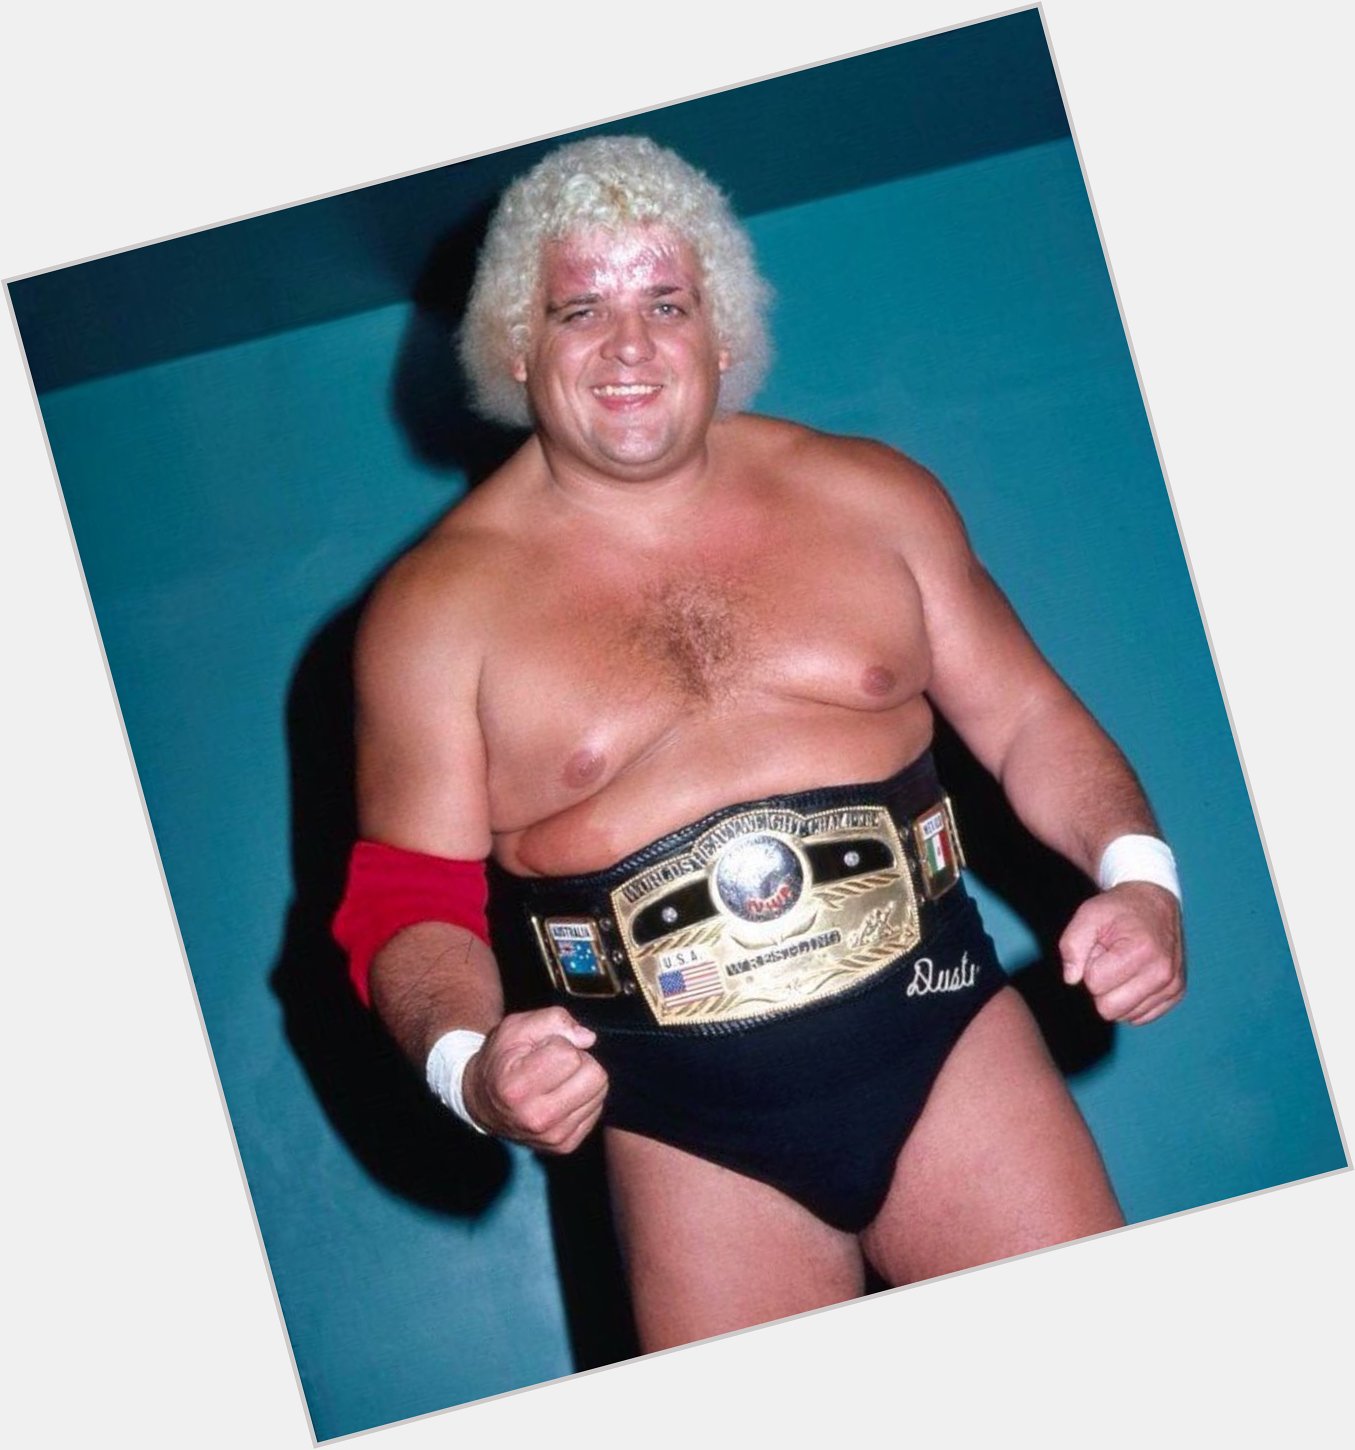  HAPPY BIRTHDAY TO THE AMERICAN DREAM DUSTY RHODES, YOU ARE MISSED GREATLY ! 